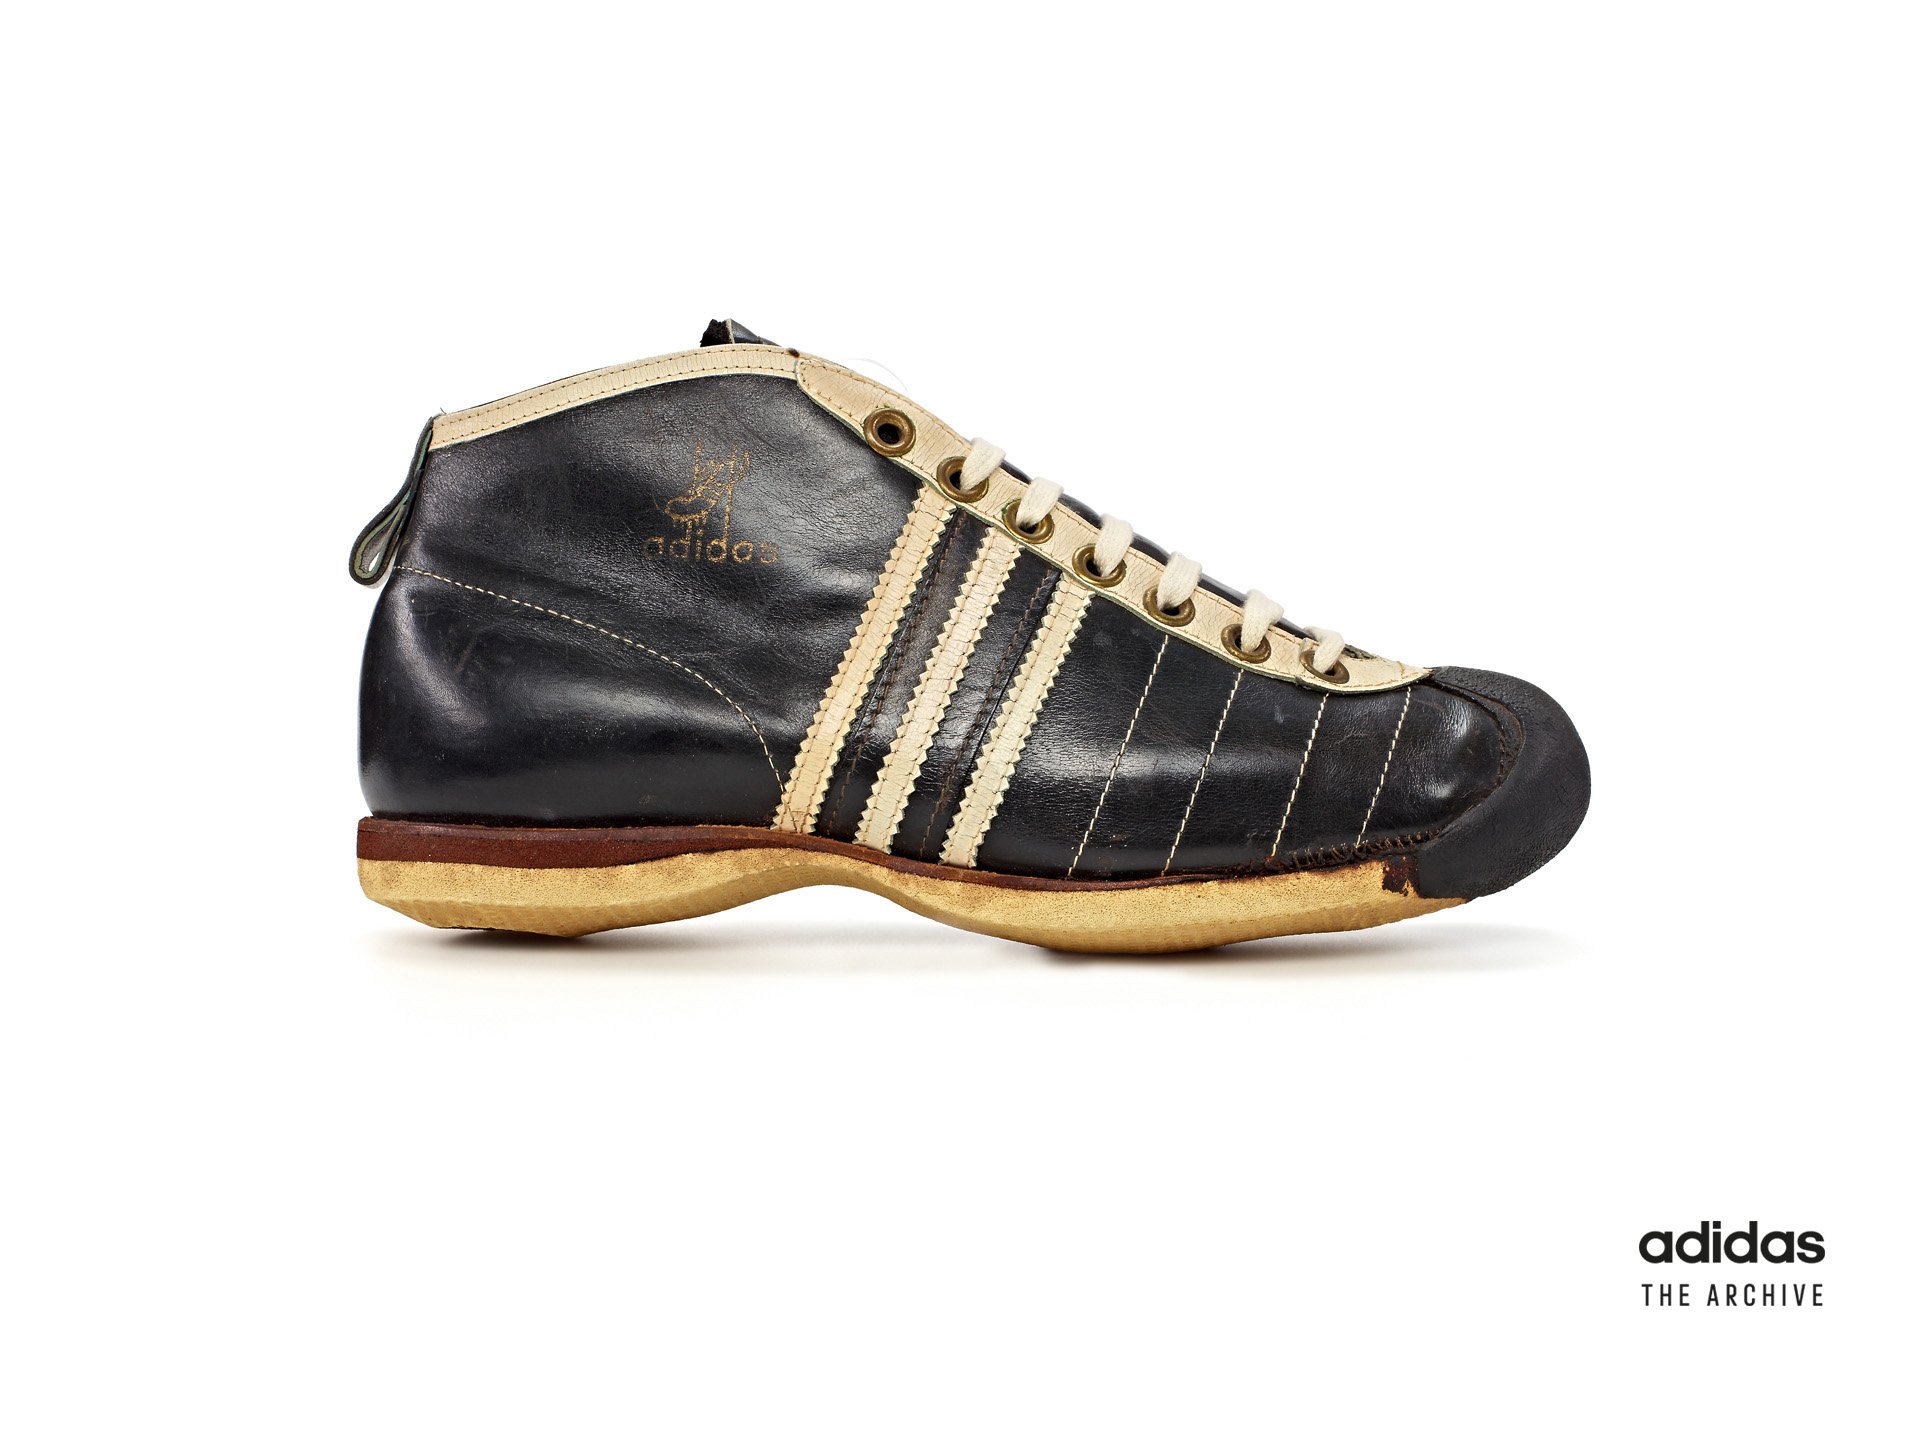 A bulky, black, vintage Adidas soccer shoe with yellowing laces and sole.